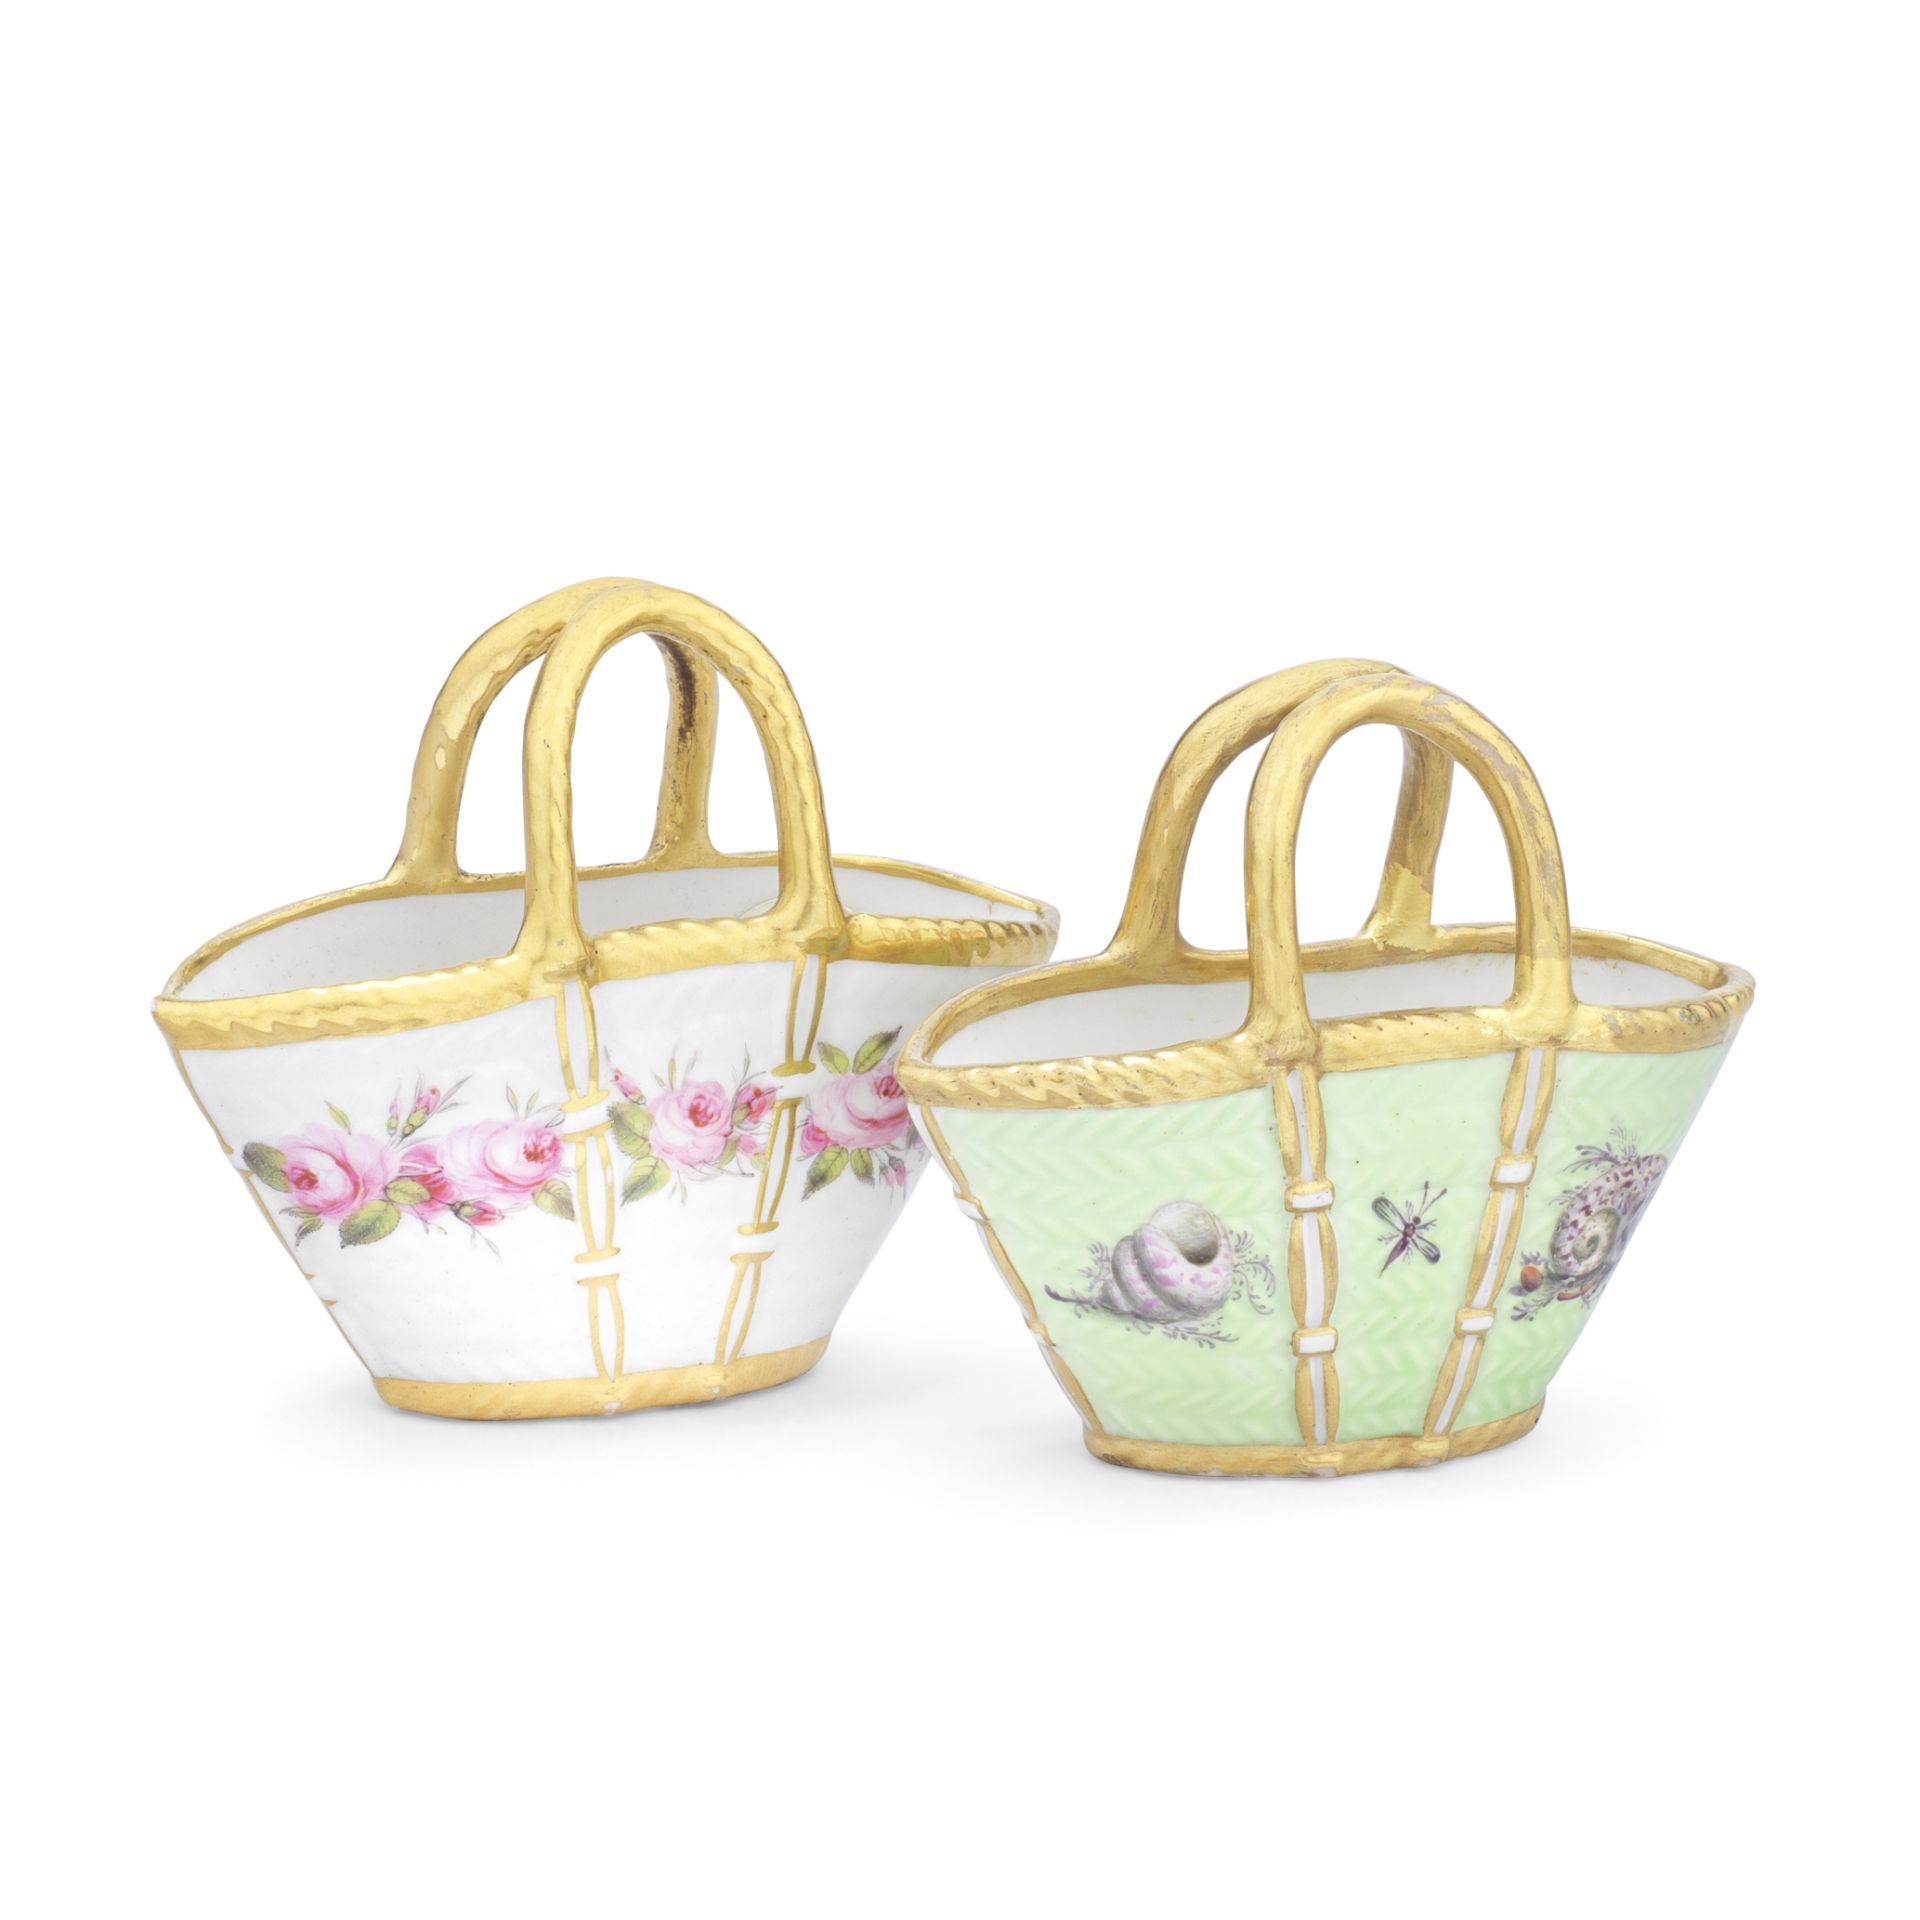 Two Flight, Barr and Barr Worcester miniature baskets, circa 1825